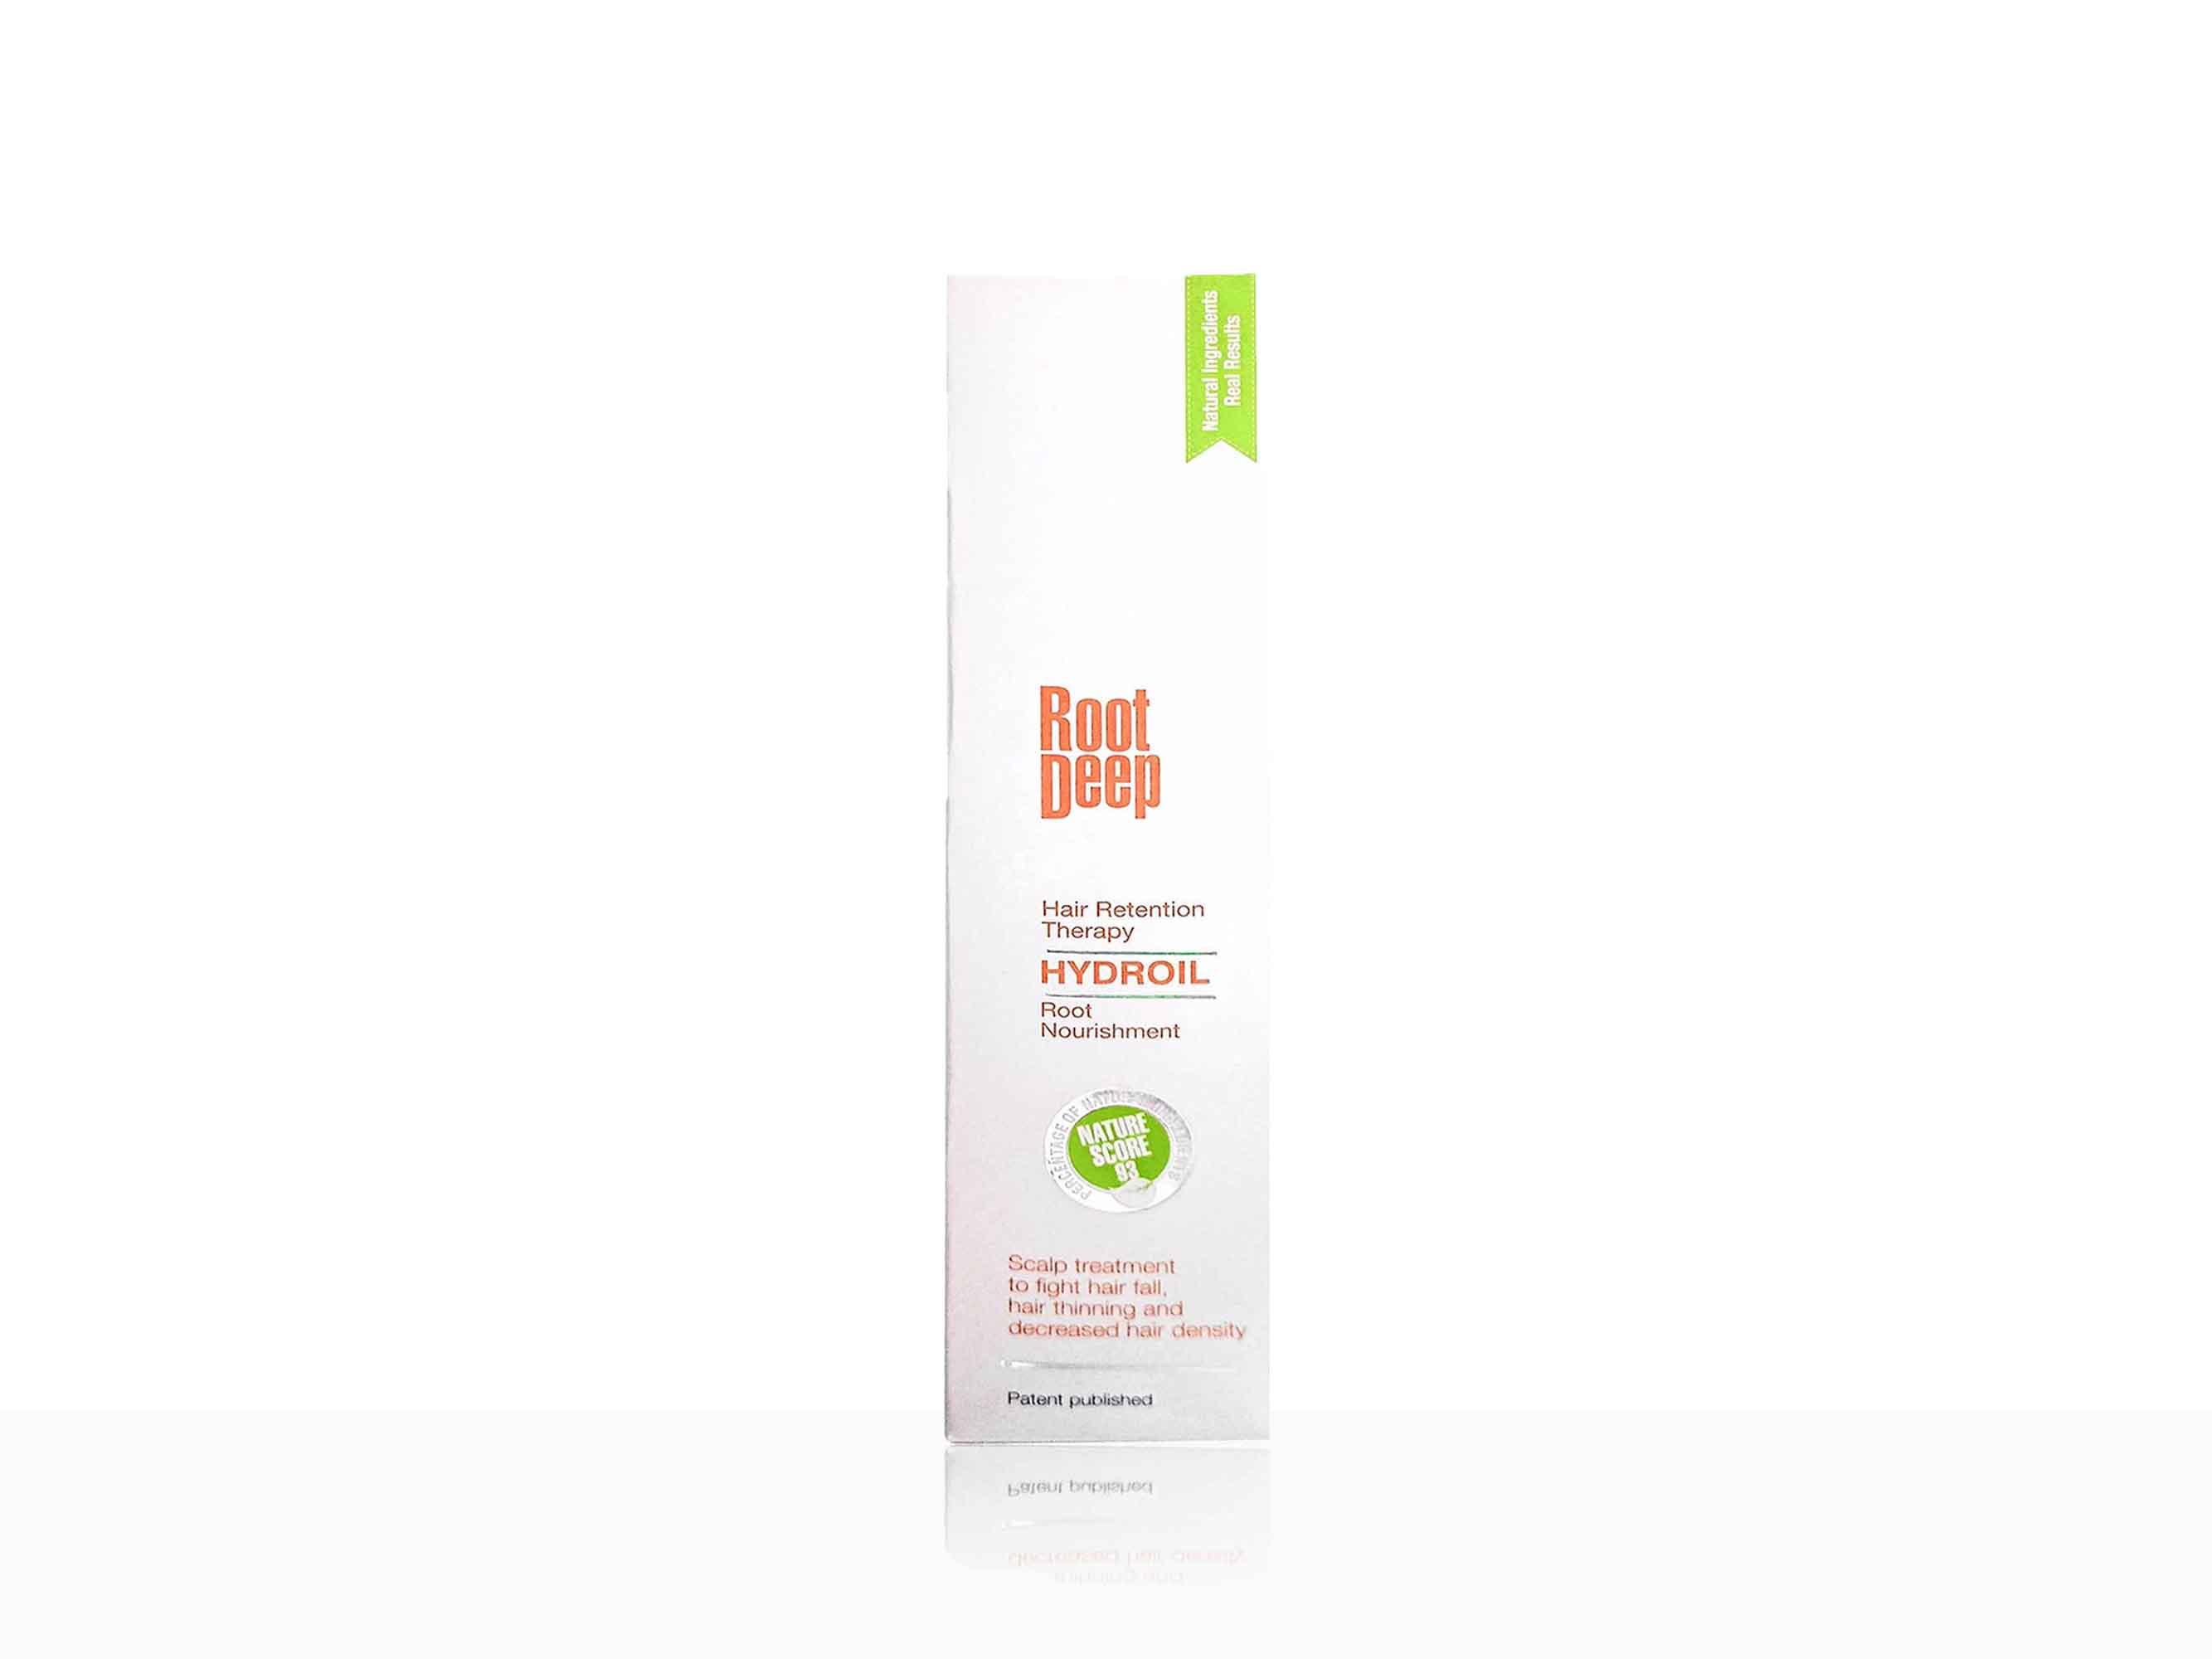 Root Deep Hair Retention Therapy Hydroil - Clinikally